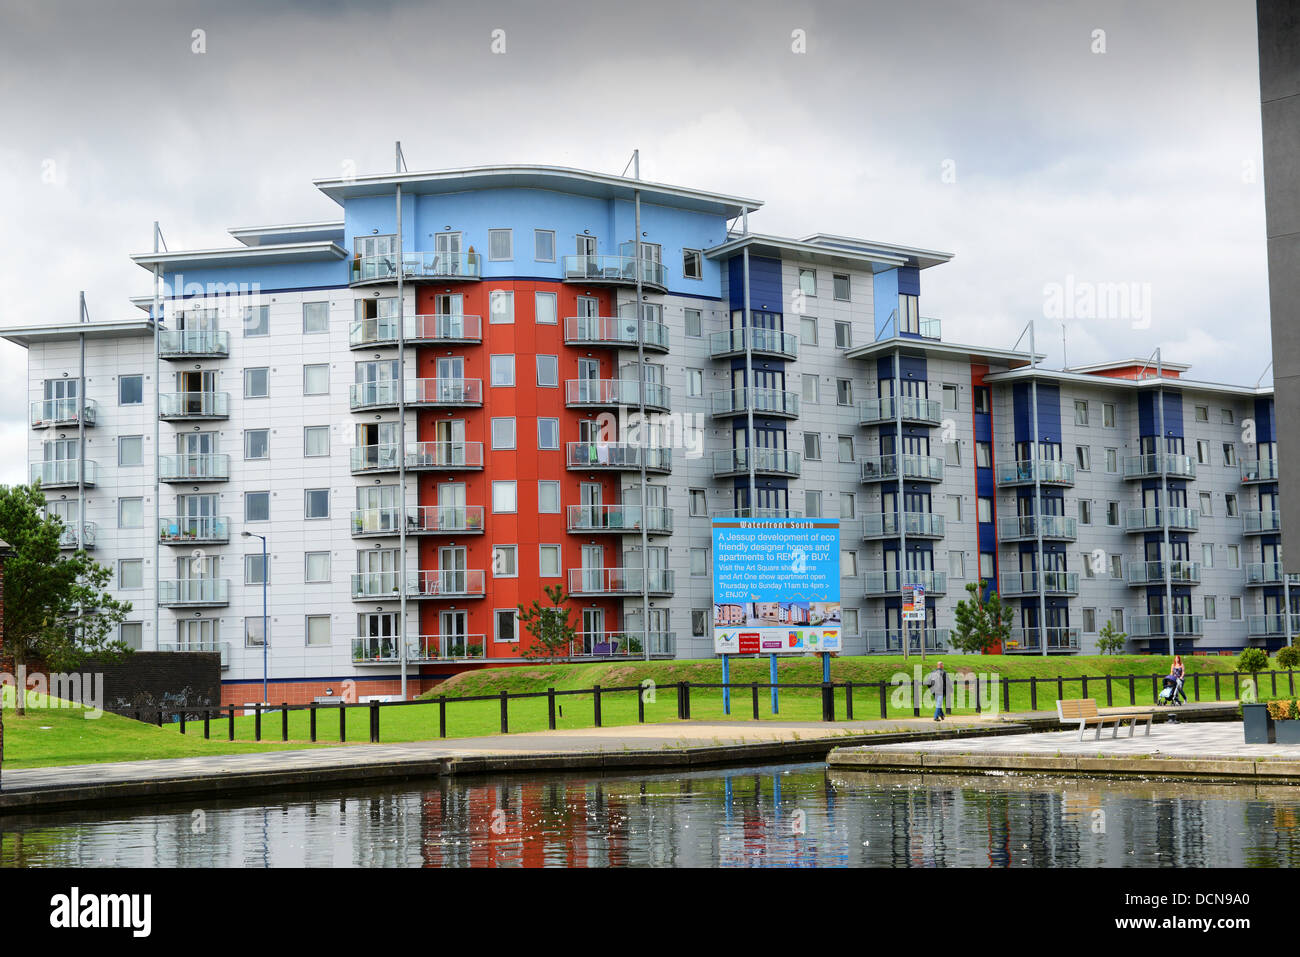 Eco friendly Designer-Apartments in Walsall, West Midlands, UK Stockfoto